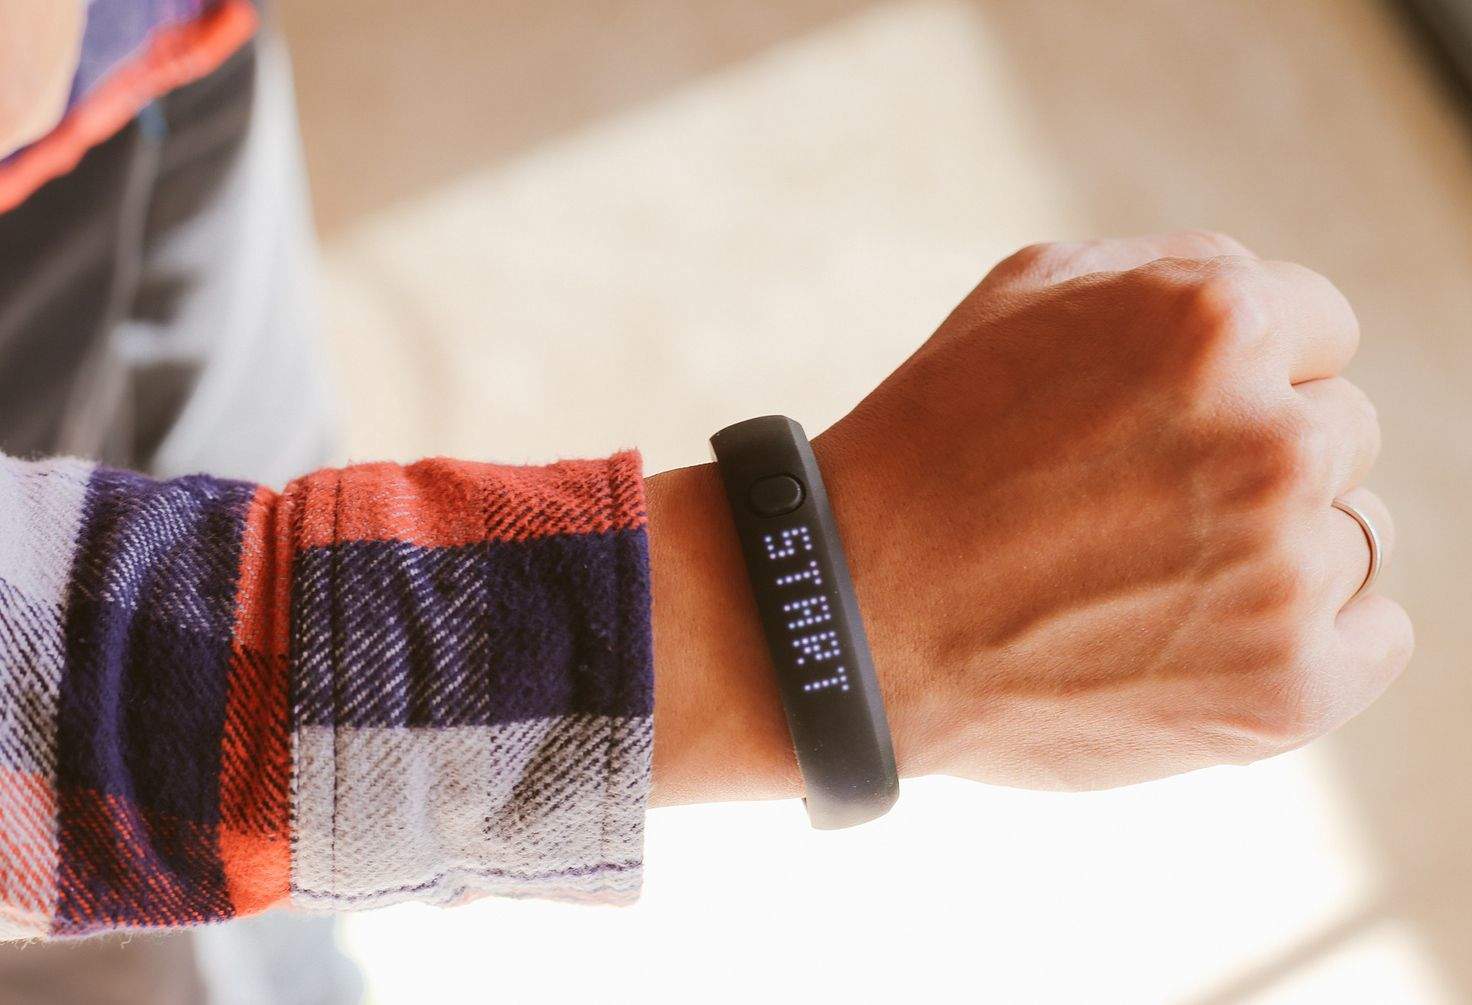 Microsoft's smartwatch will supposedly look more like this Nike+ FuelBand than an Android Wear device. Photo: Andrew Guan/CC/Flickr